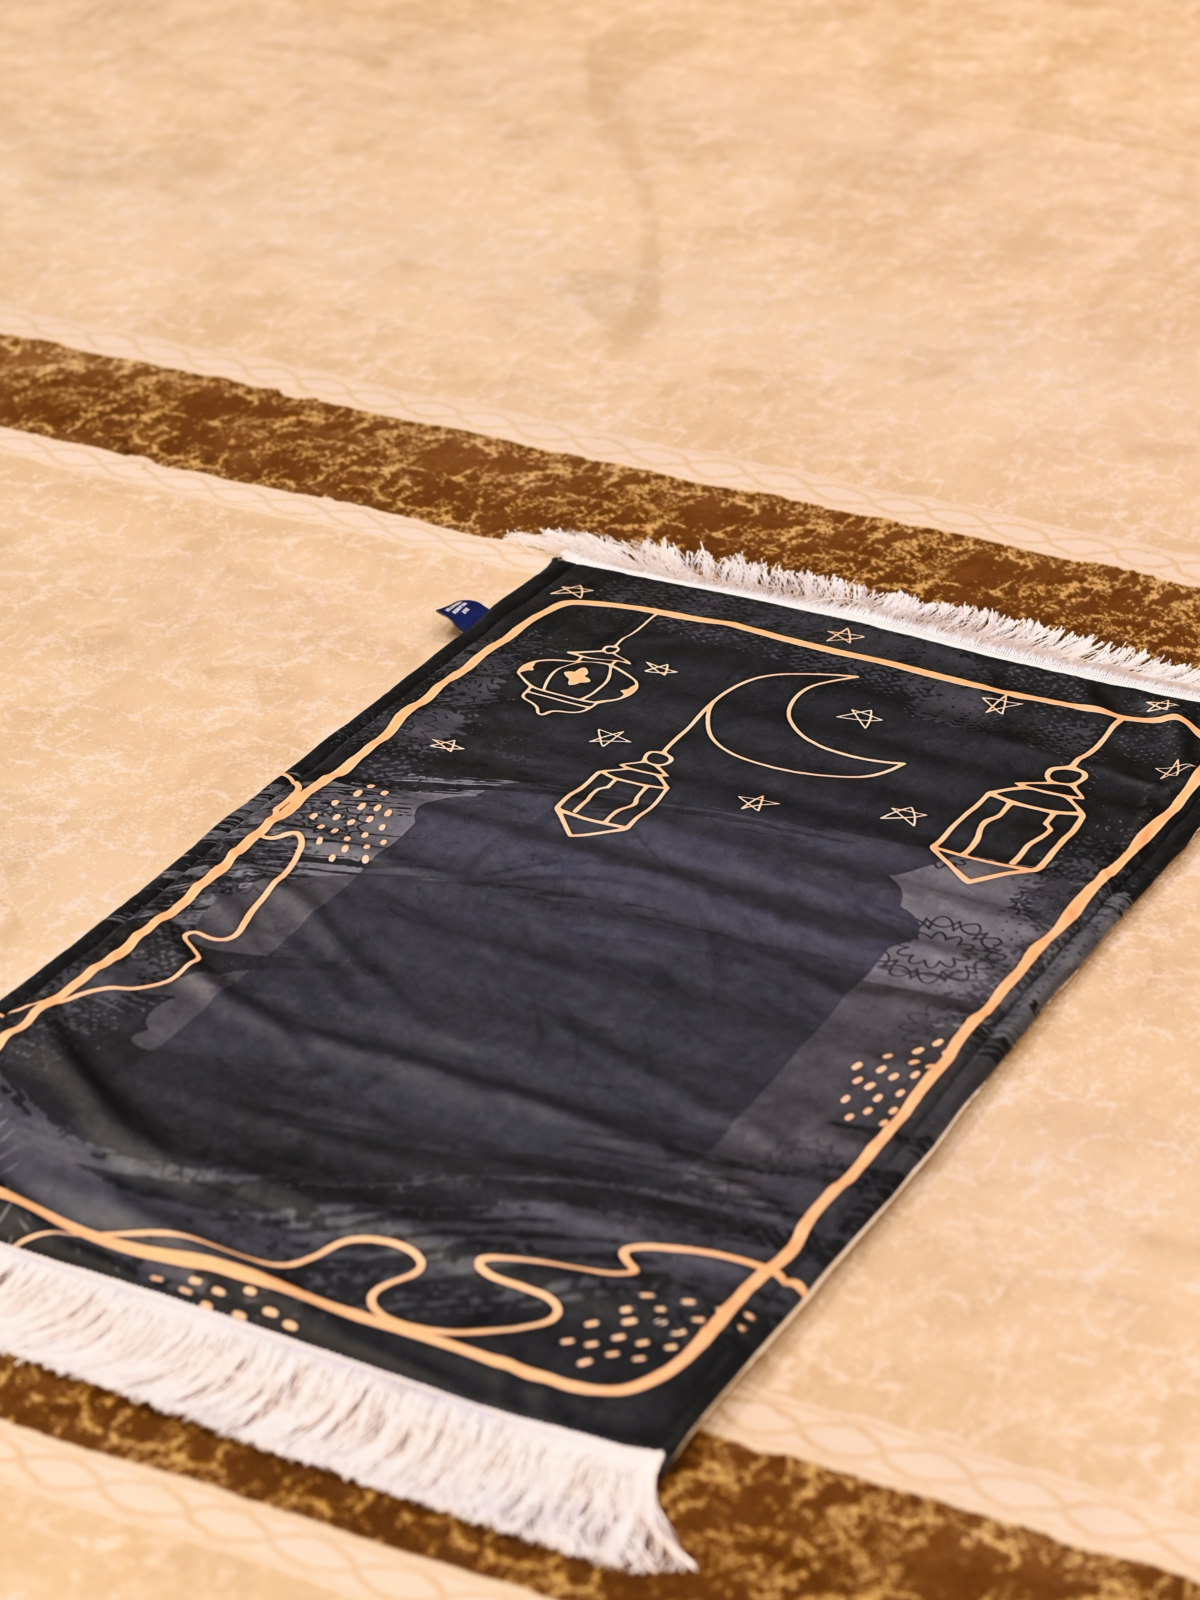 Go through with your spiritual journey with this new prayer mat that will make you feel the epitome of comfortability and protection in your prayer time. Excellent quality at an affordable price, these mats are sure to bring a smile to your face and help you center yourself during your spiritual times.